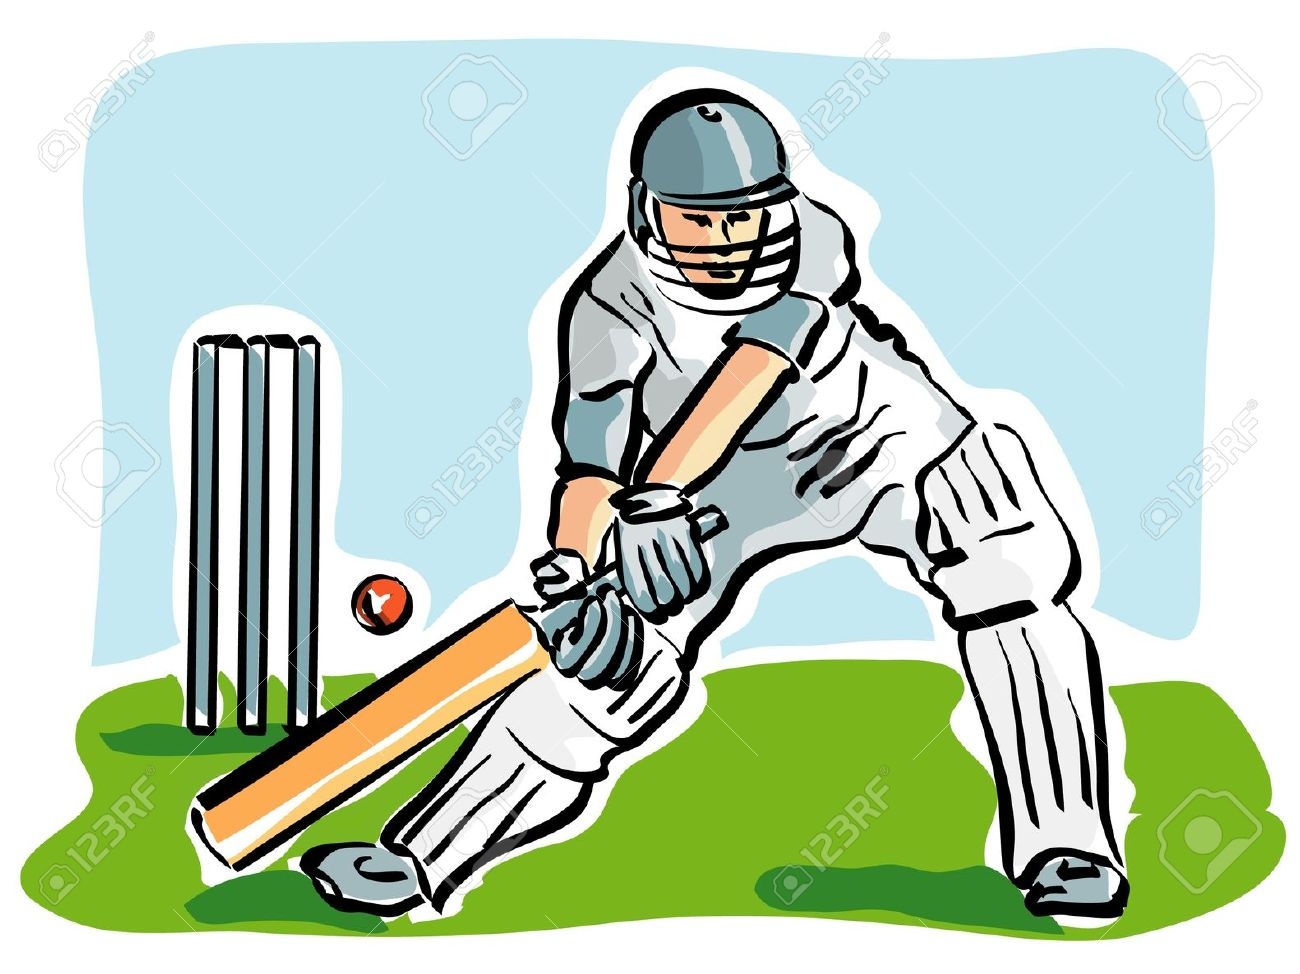 Cricket clipart, Cricket Transparent FREE for download on.